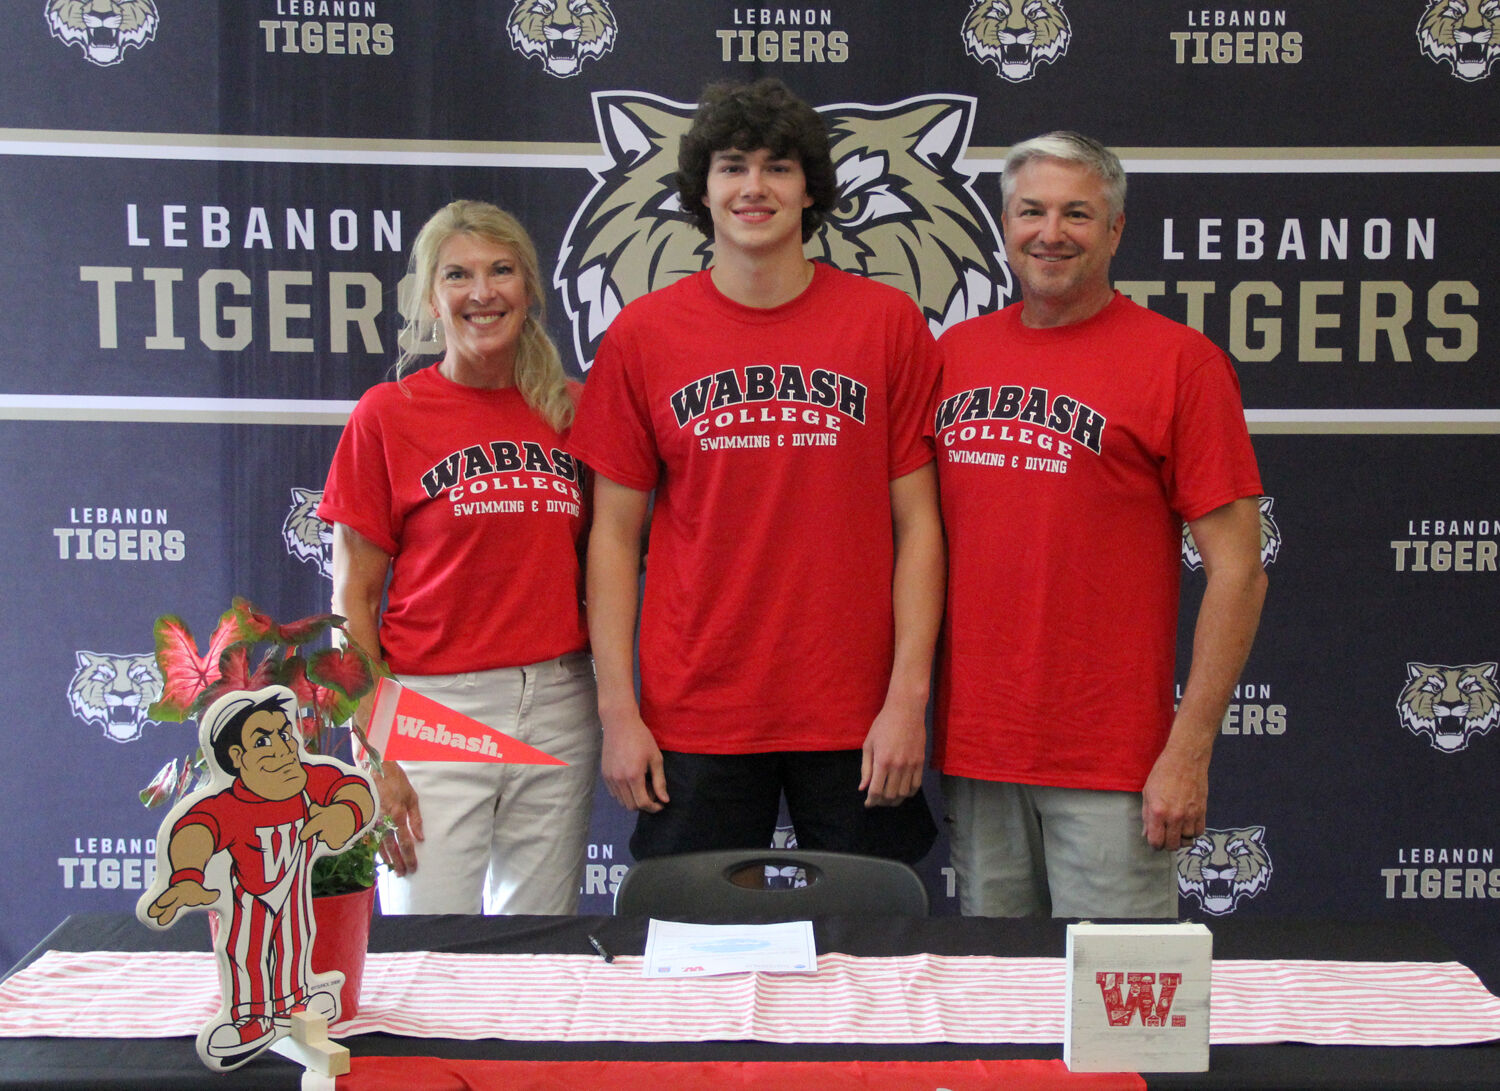 Lebanon’s Goff signs with Wabash